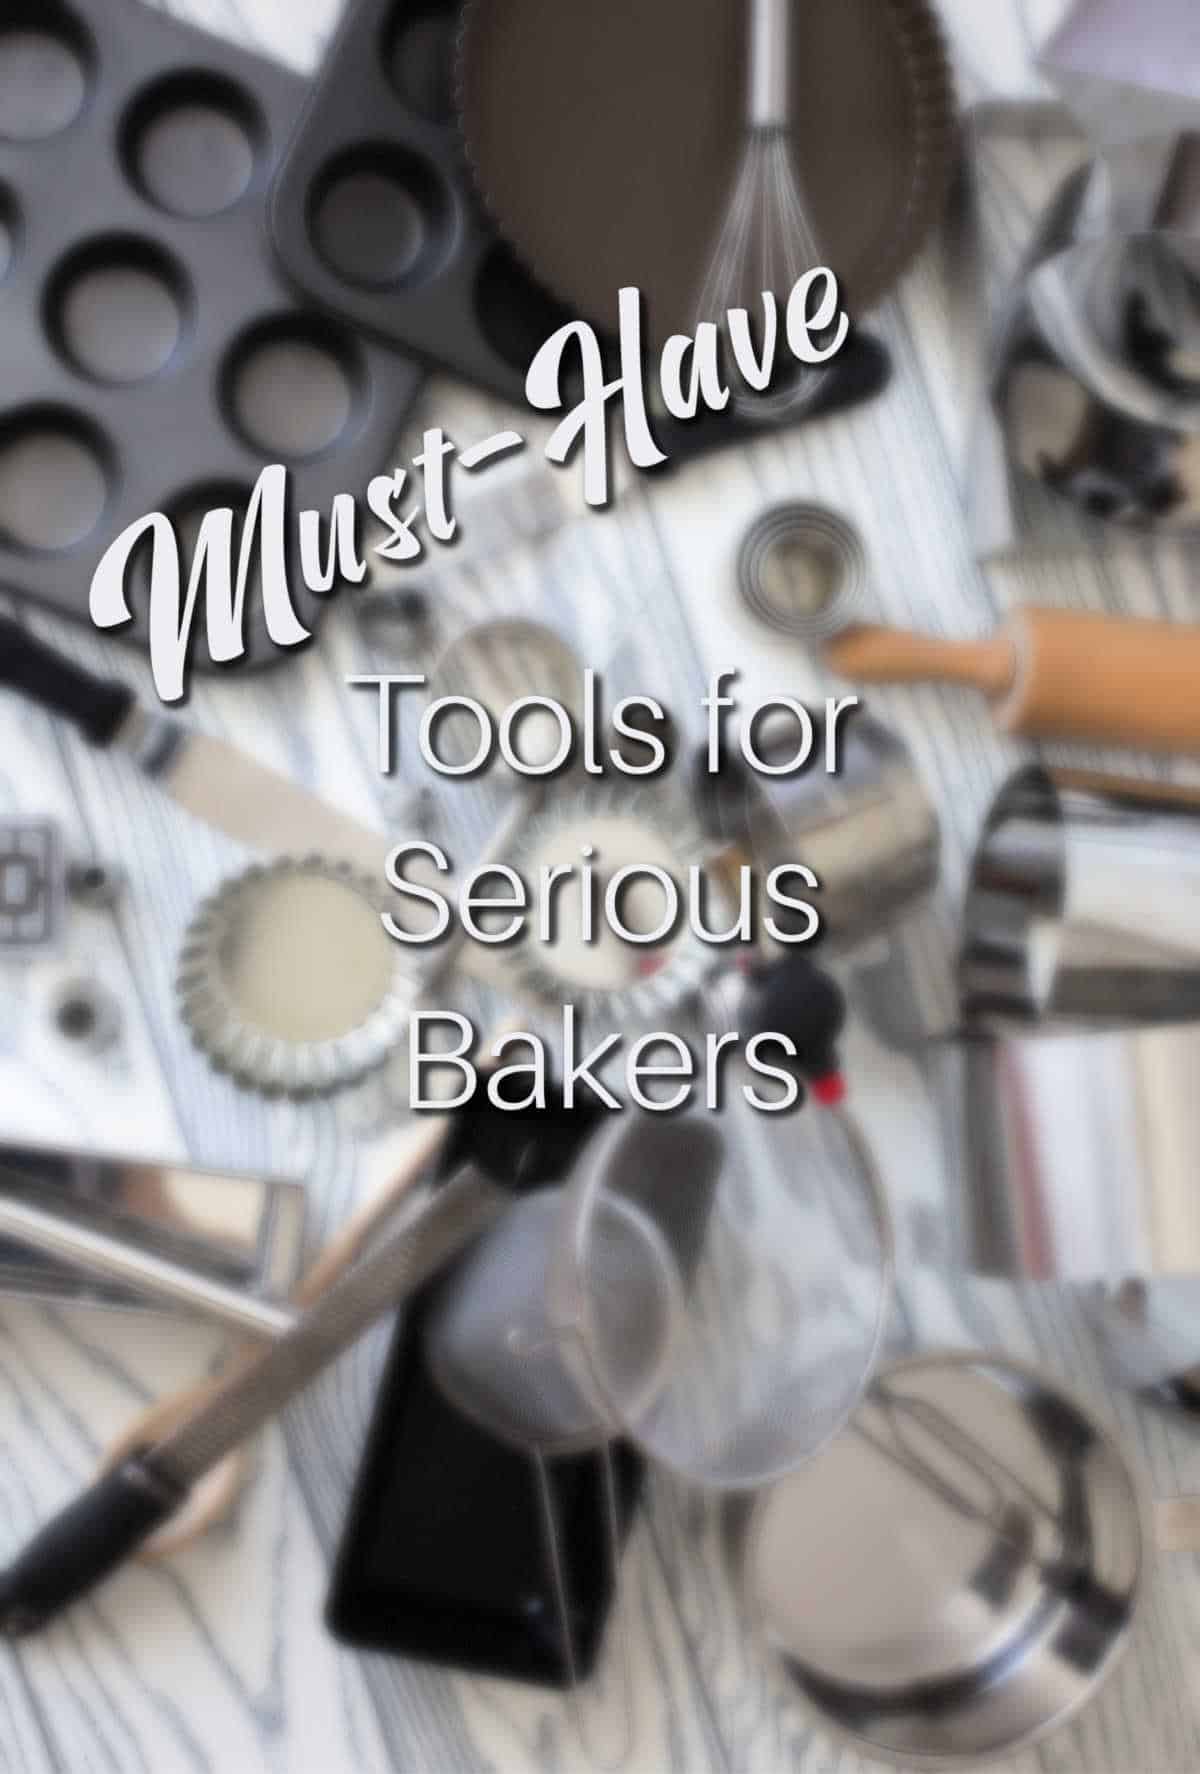 A vertical image of baking pans and gadgets with a text overlay reading "must-have tools for serious bakers."